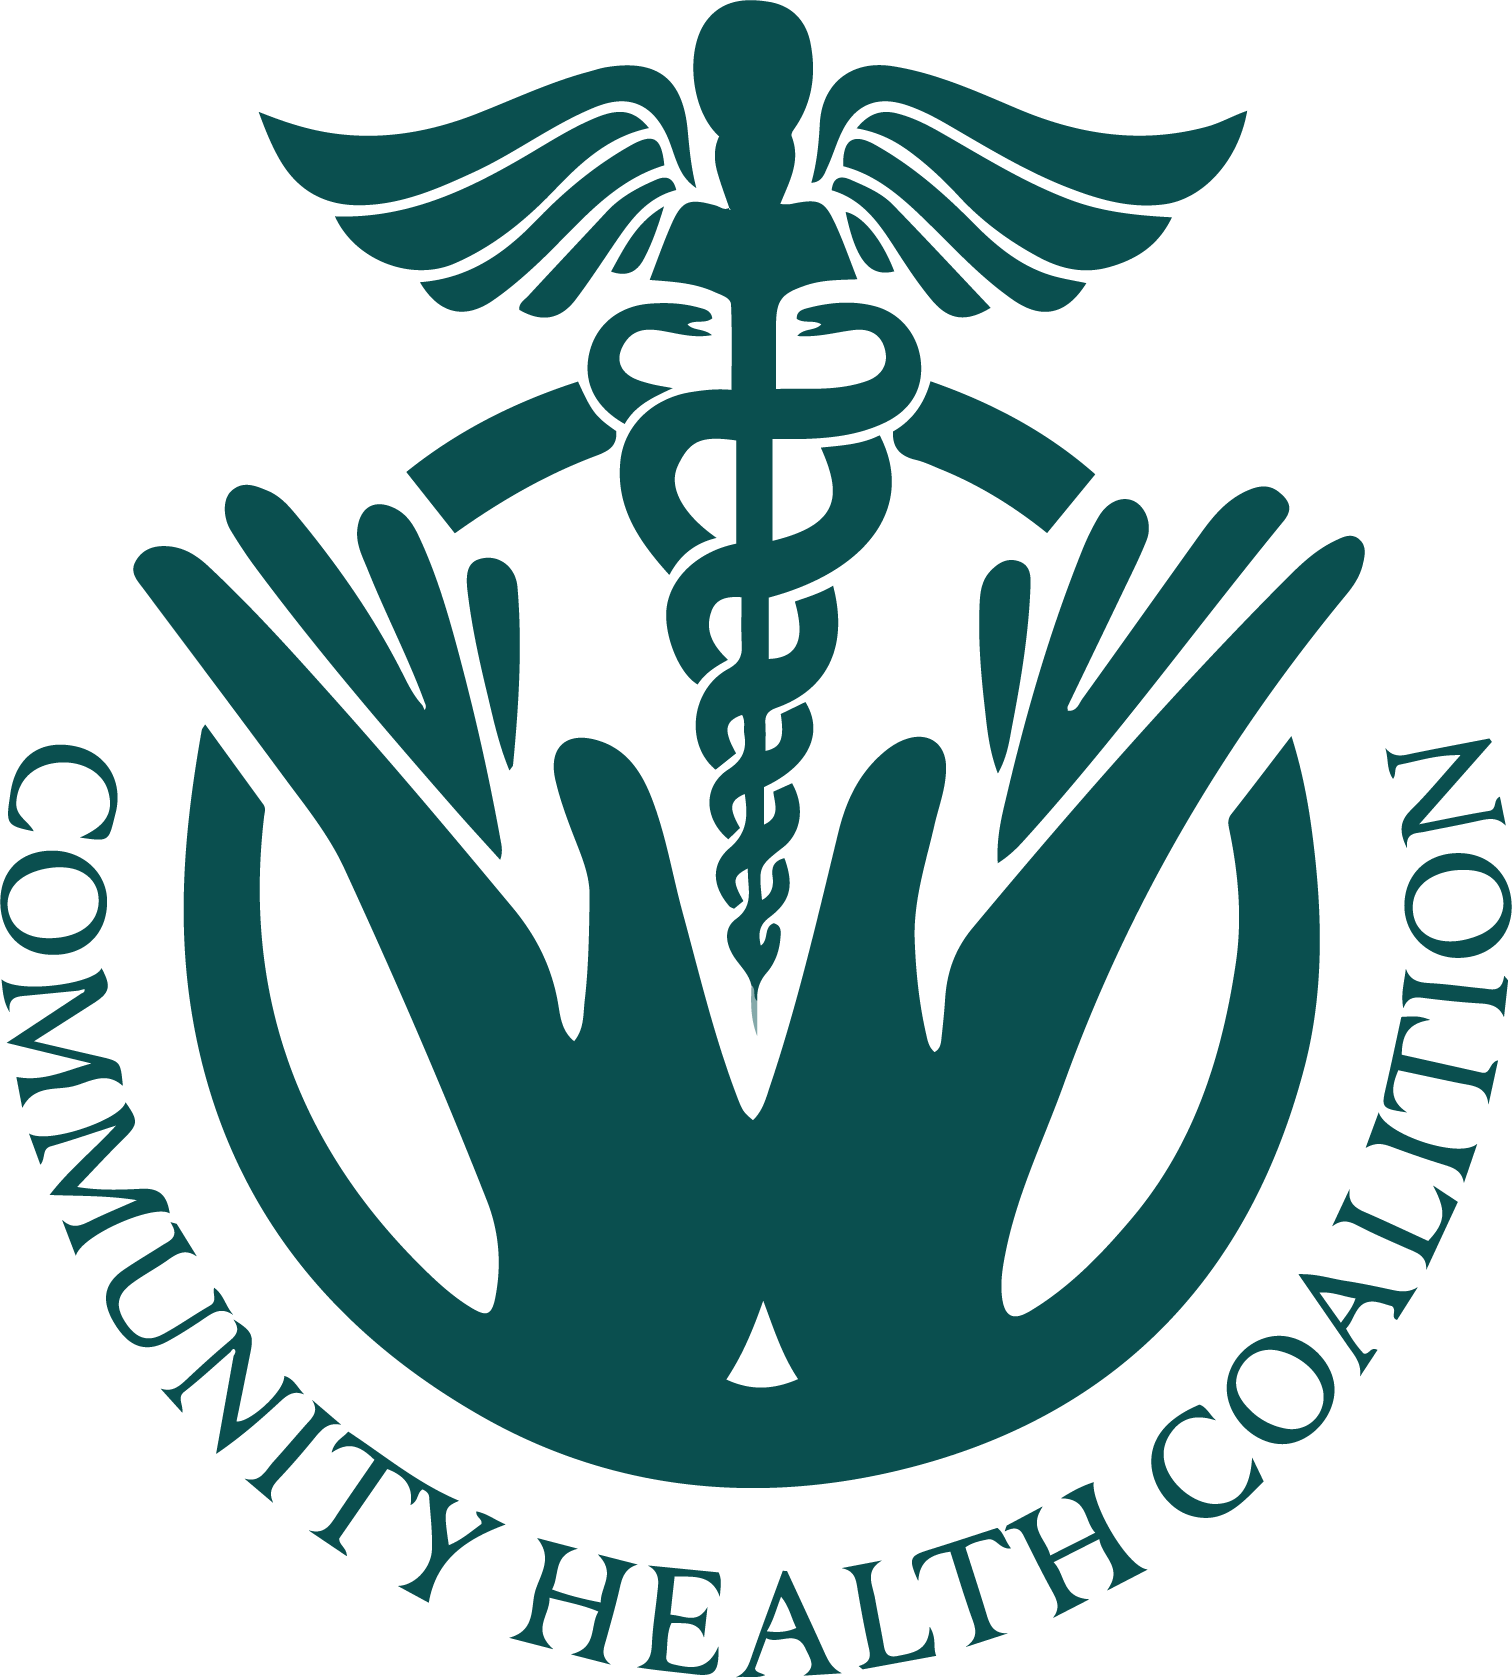 A logo for the community health coalition with hands and a caduceus